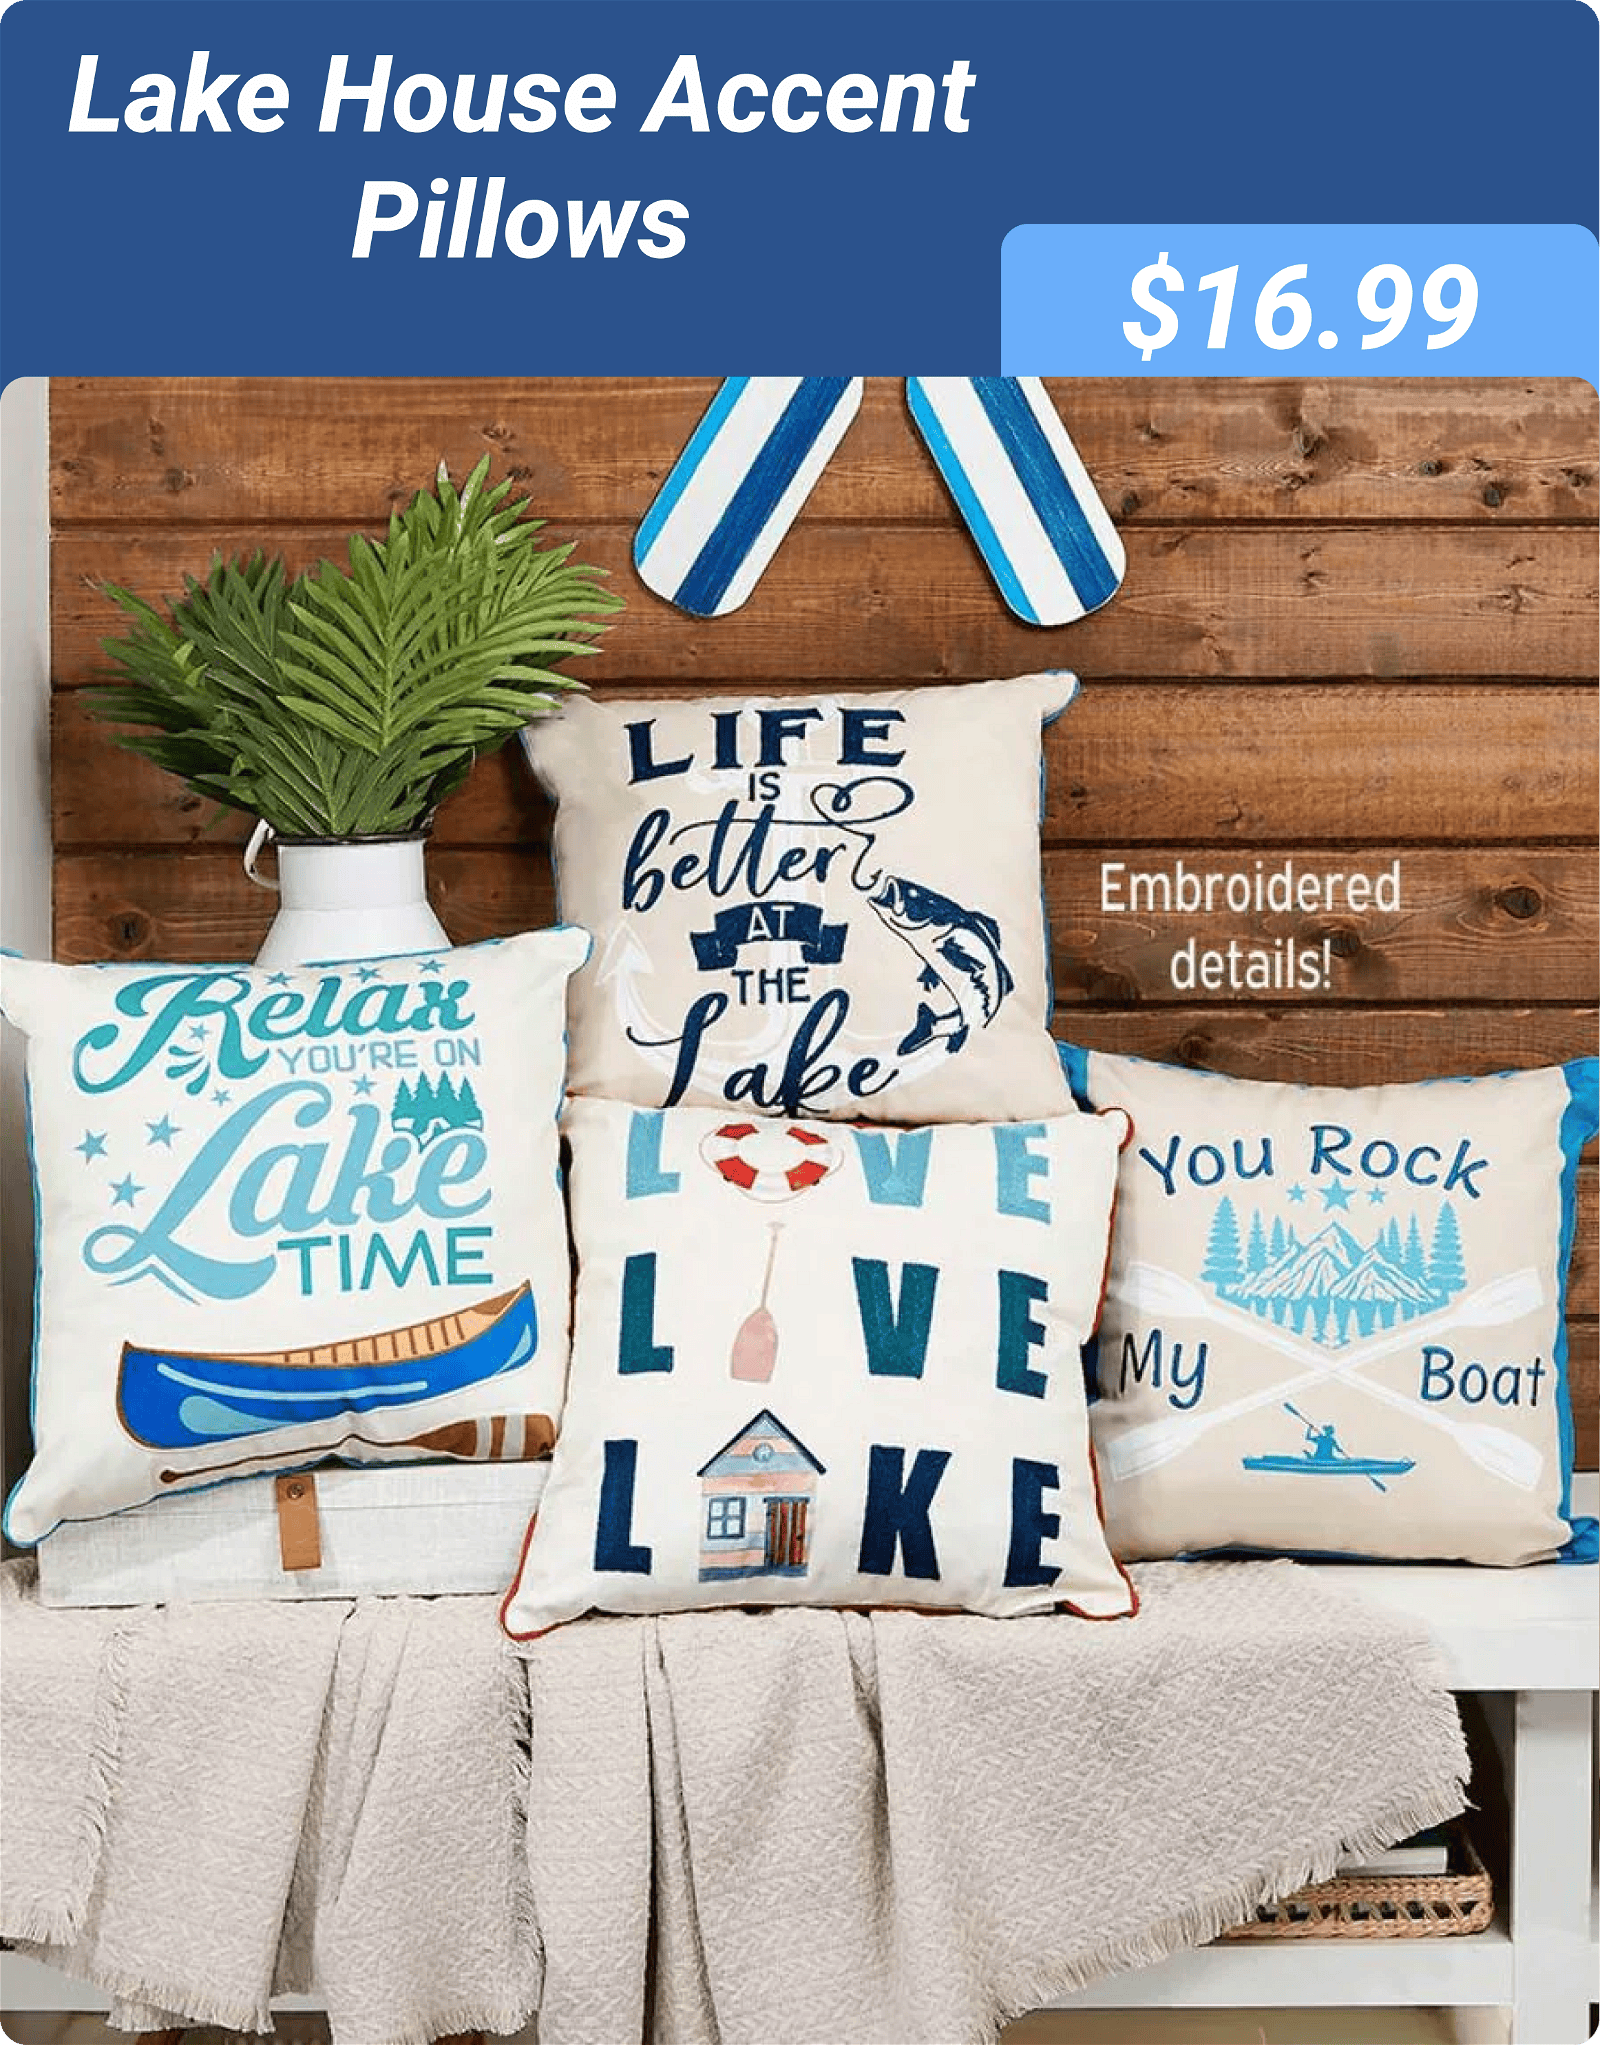 Lake House Accent Pillows